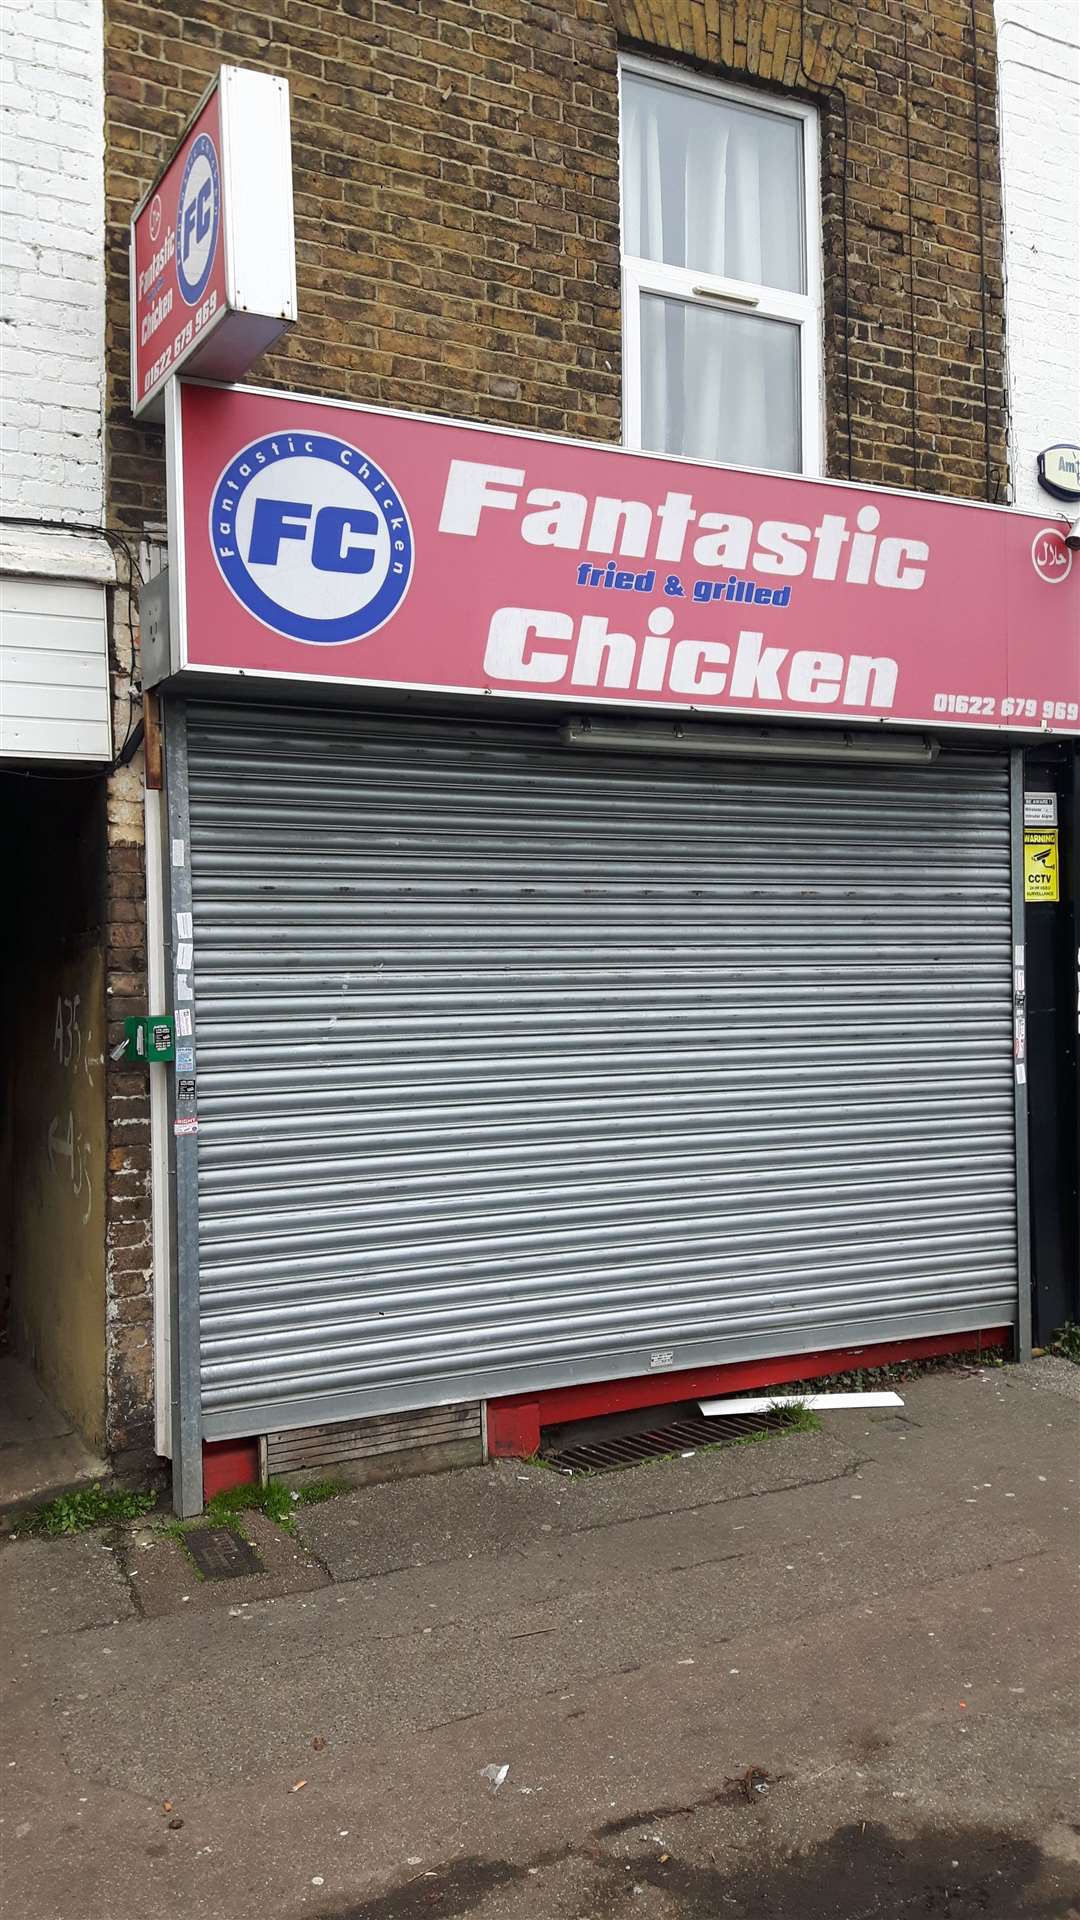 Fantastic Chicken in Sandling Road, Maidstone, looked "sweaty" from the outside